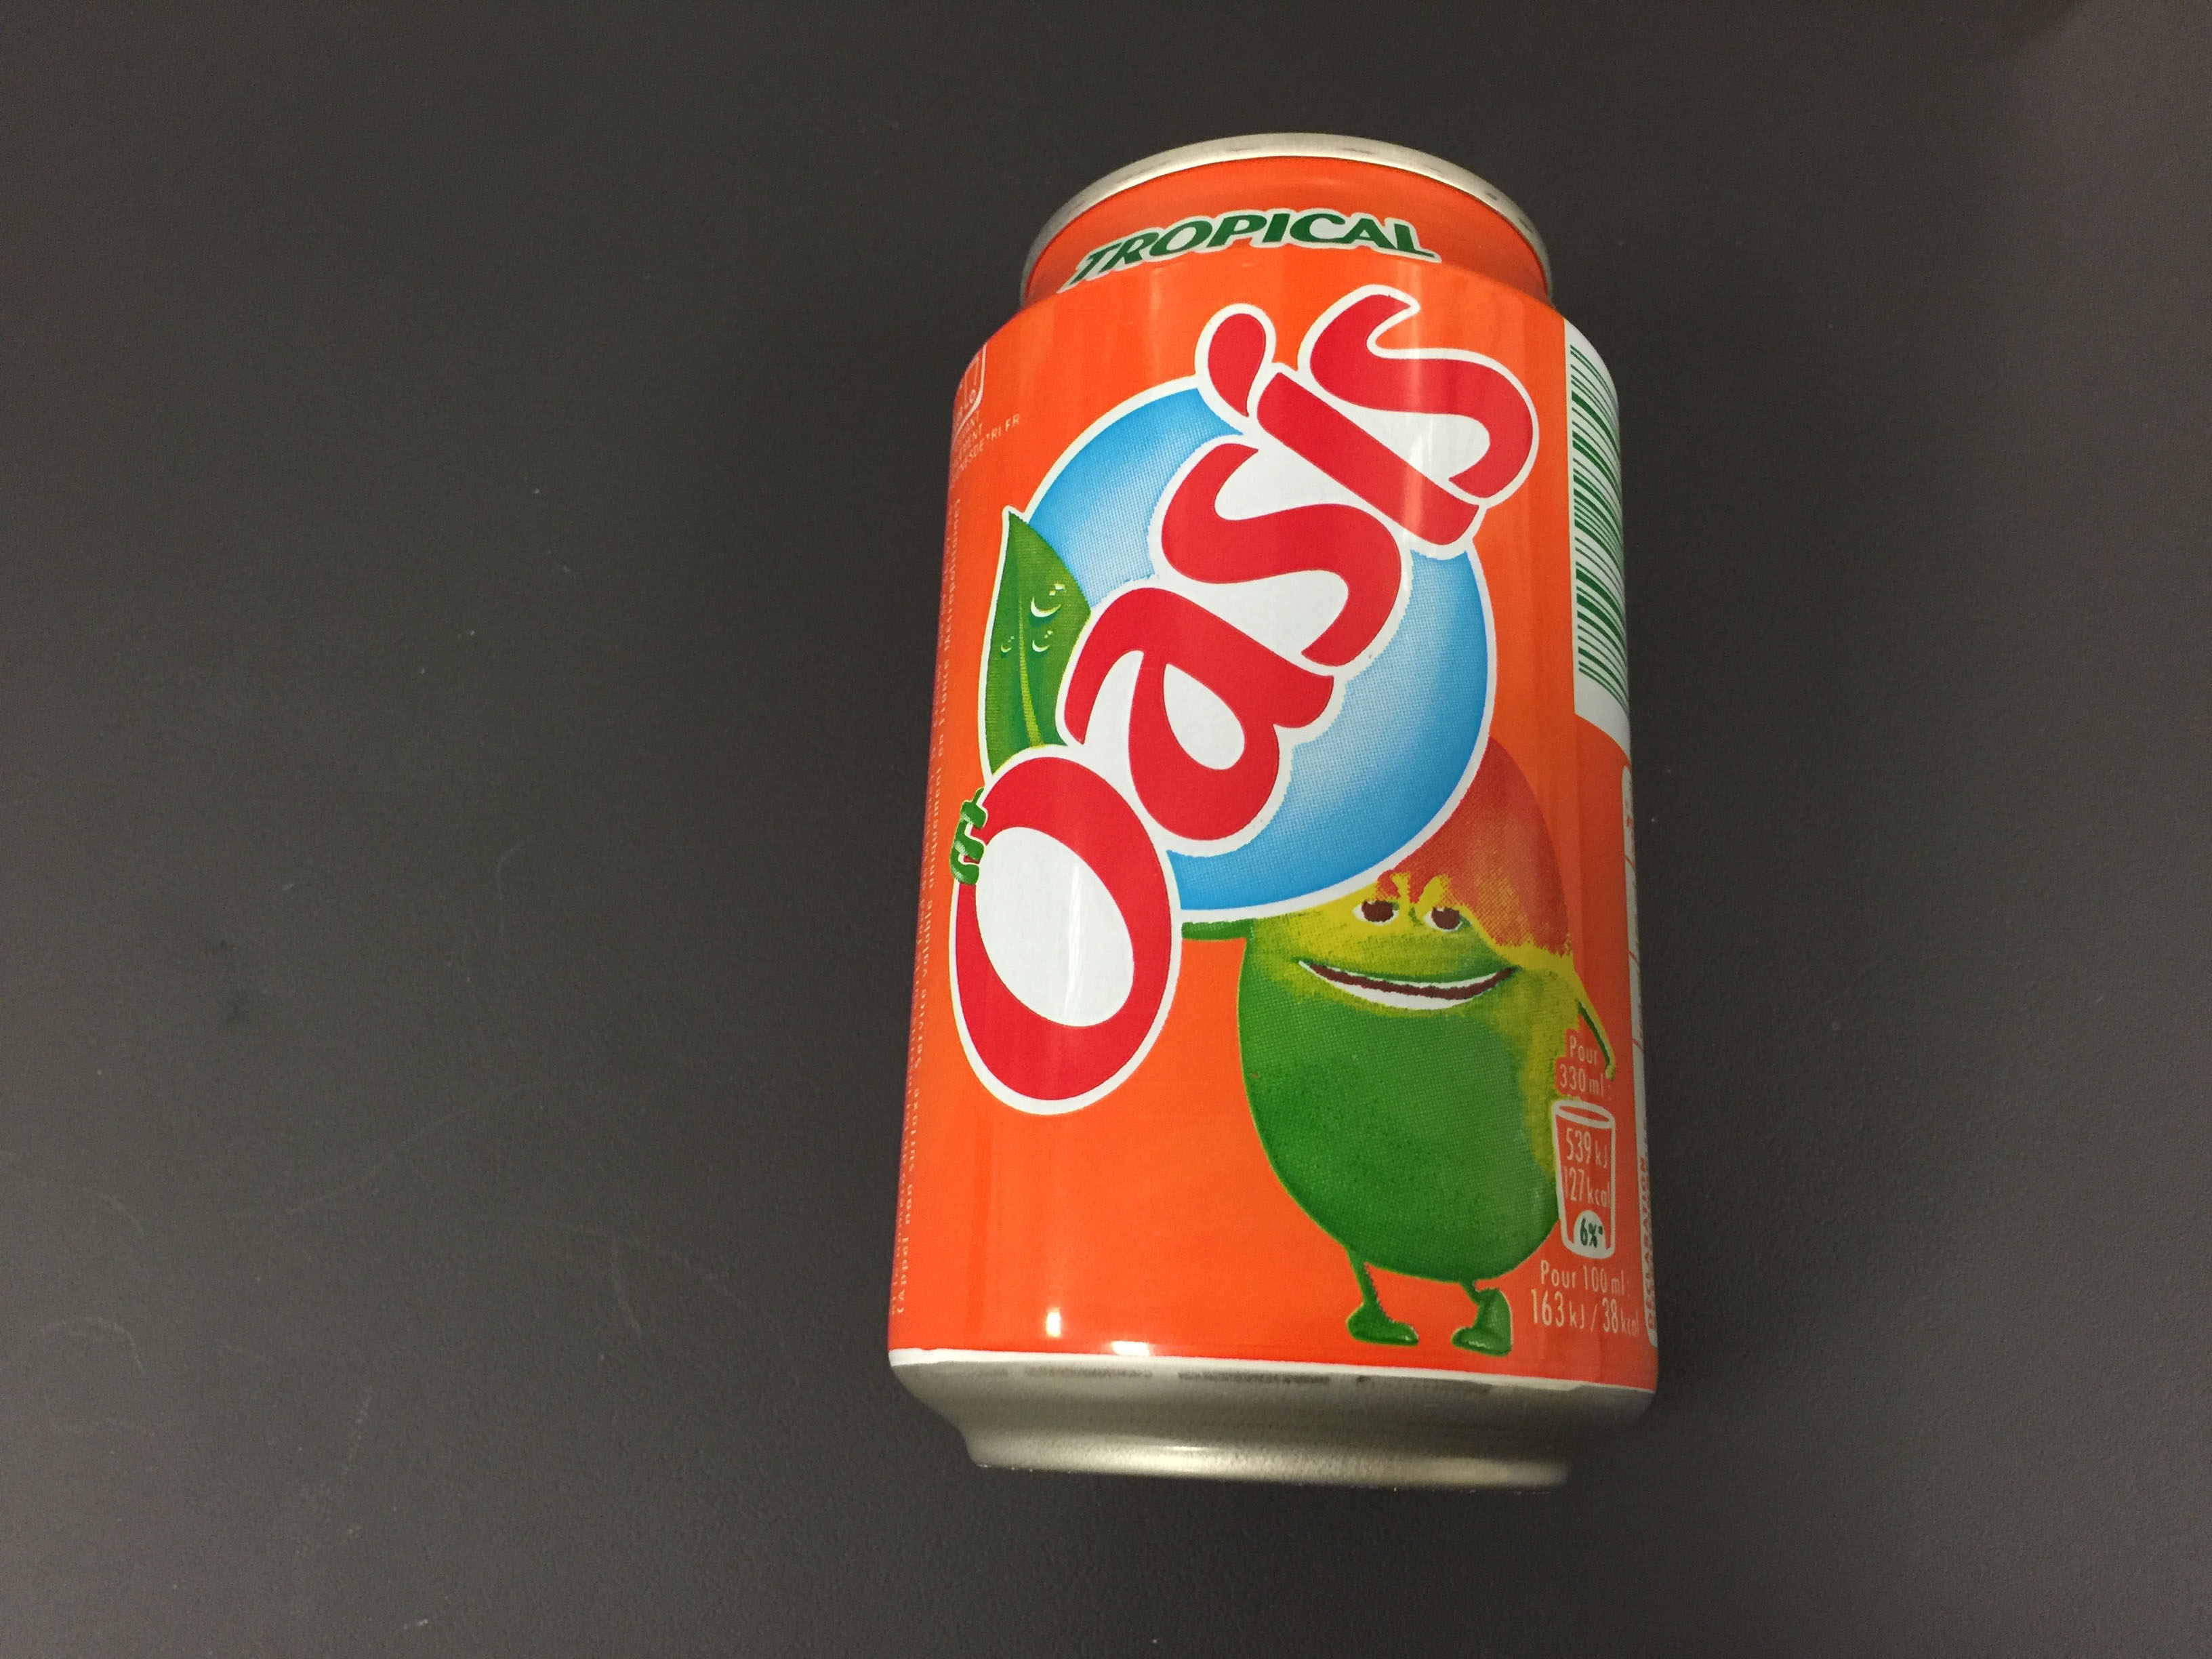 OASIS TROPICAL 33CL